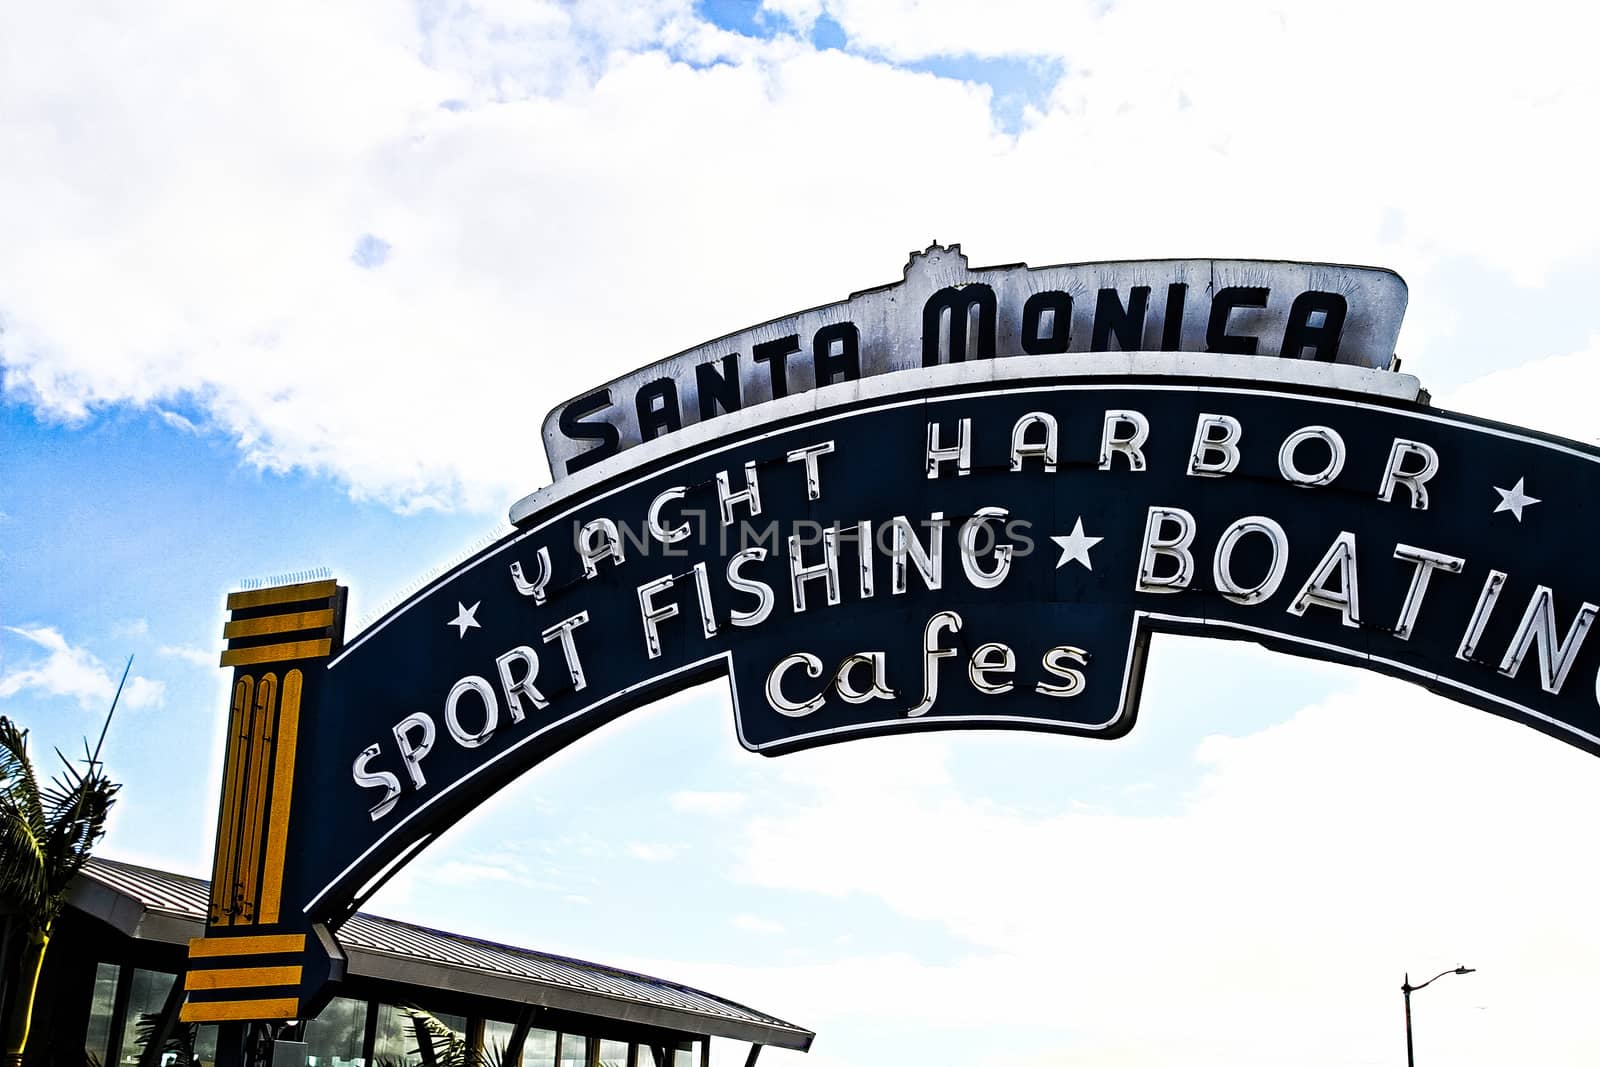 Los Angeles,CA/USA - Oct 29, 2015 : Welcoming arch in Santa Monica, California. The city has 3.5 miles of beach locations.Santa Monica Pier, Picture of the entrance with the famous arch sign.